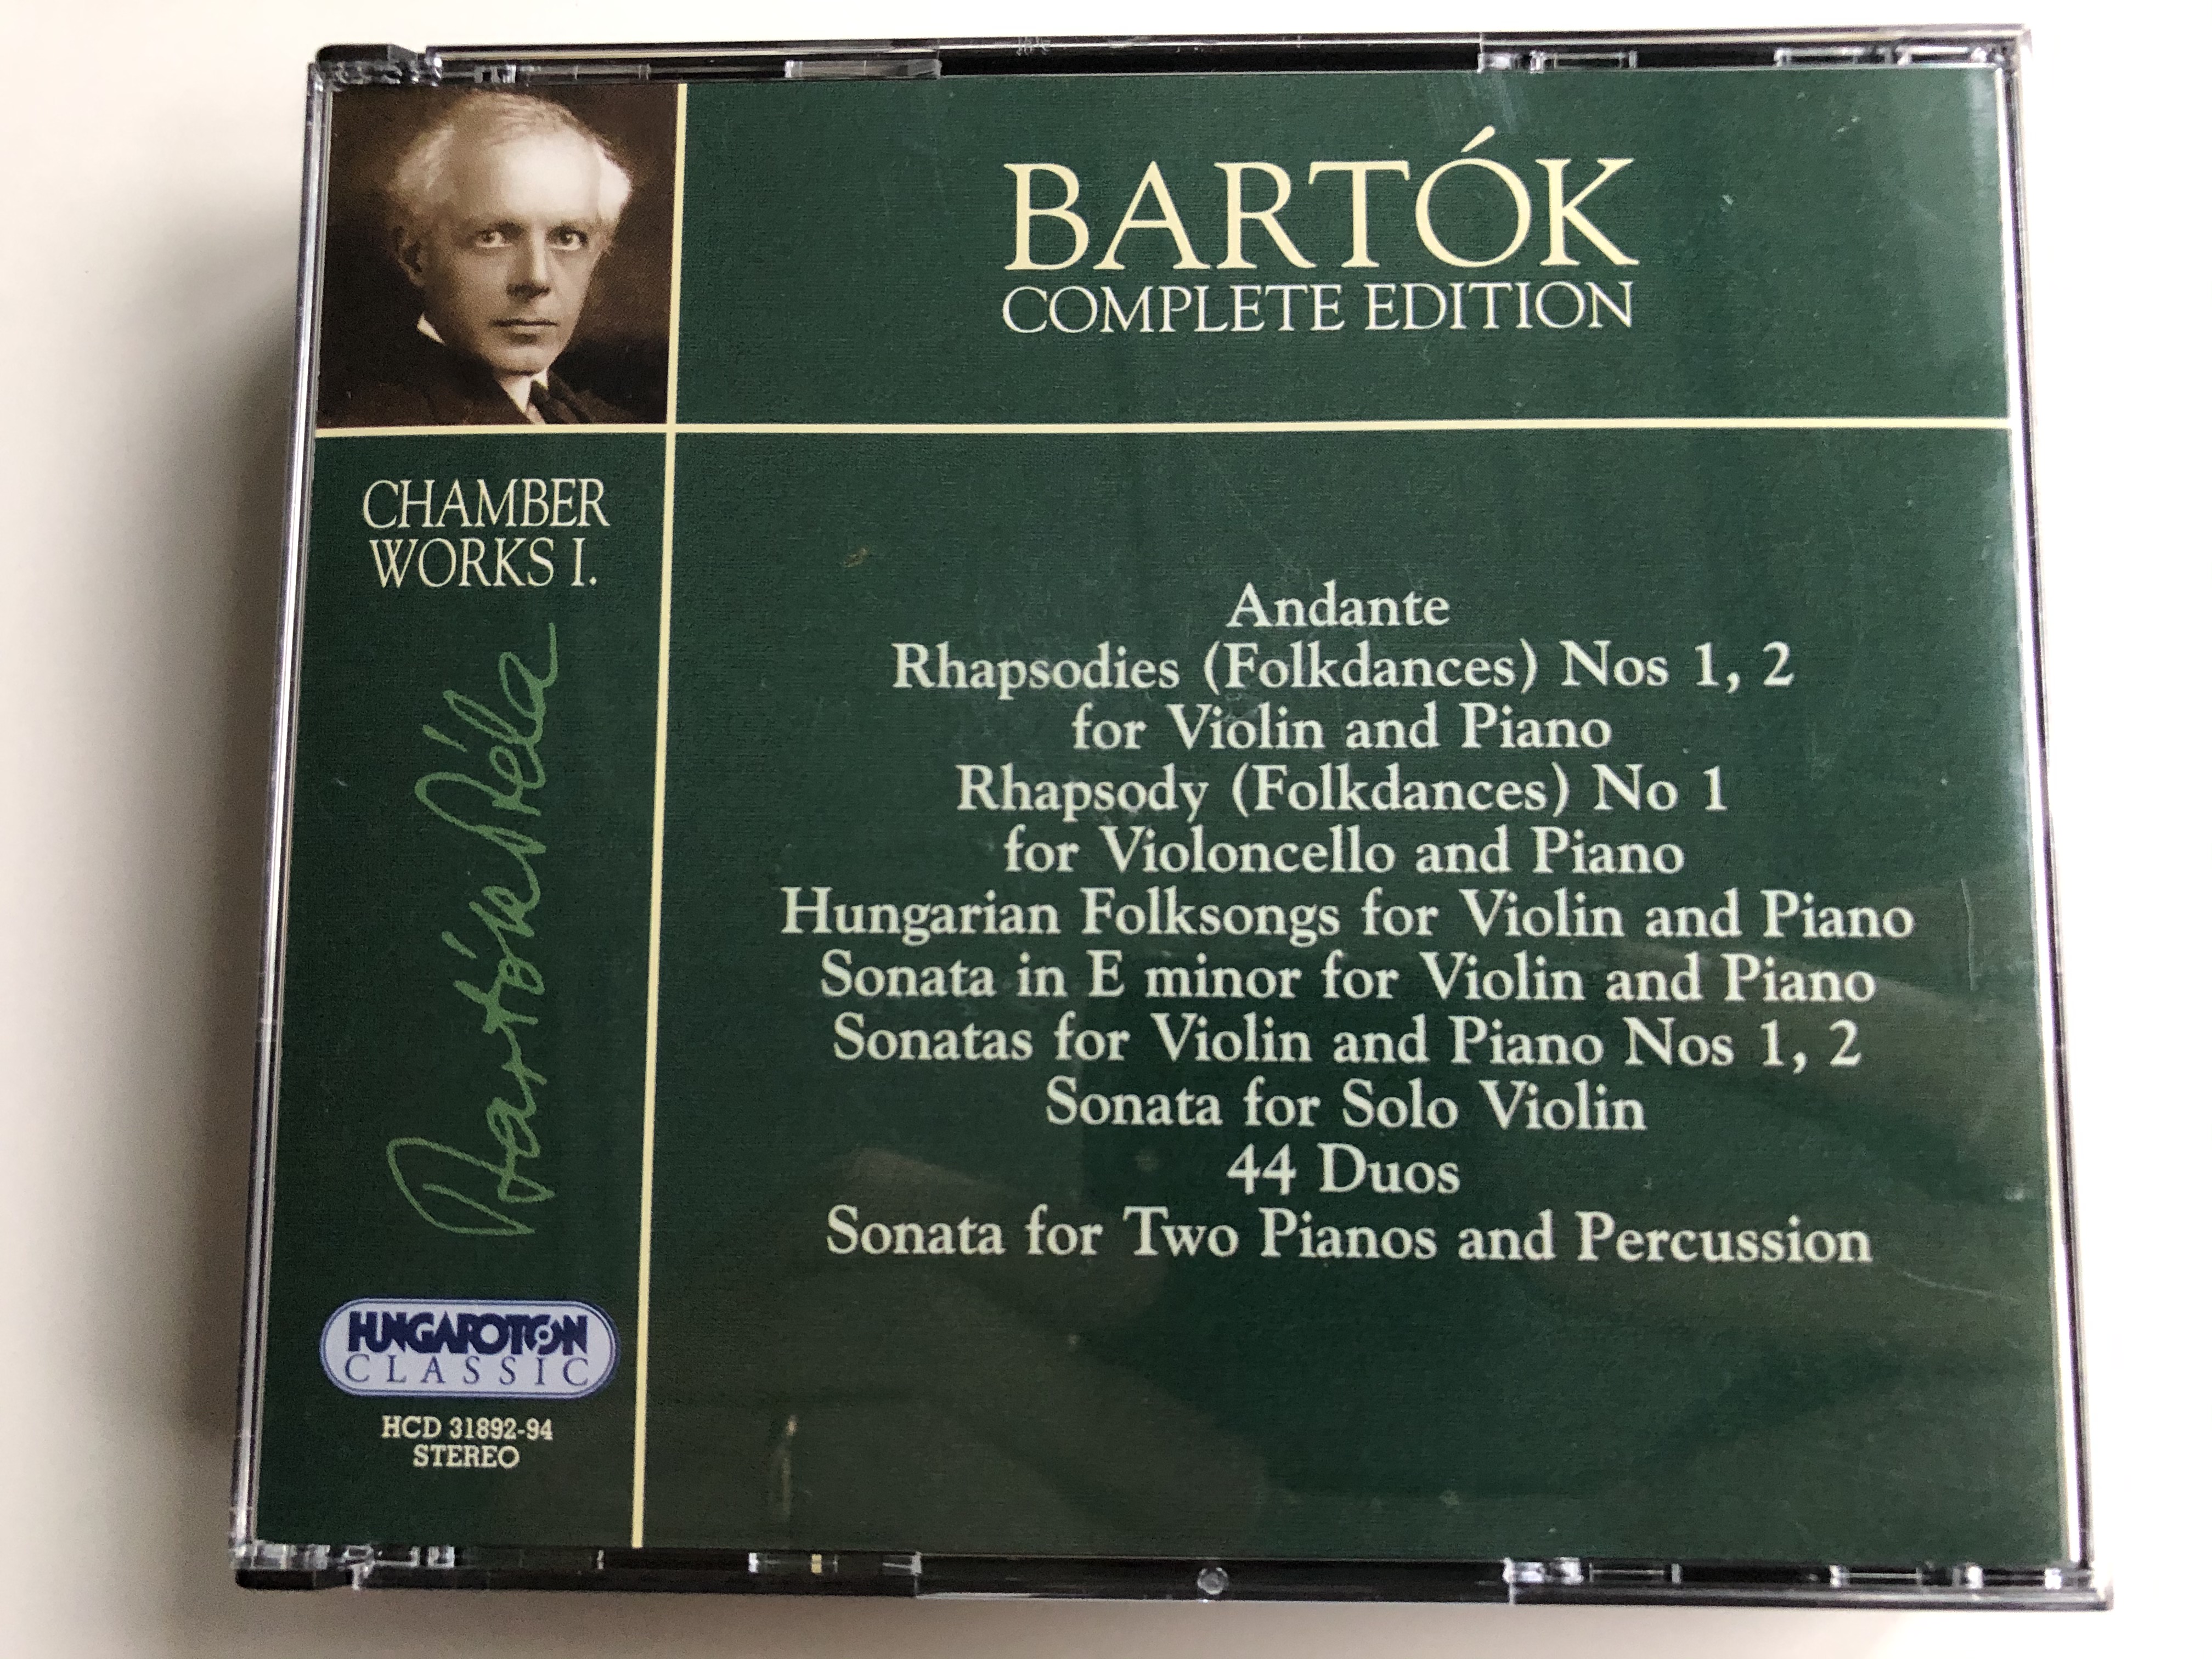 bartok-complete-edition-chamber-works-i.-andante-rhapsodies-folkdances-nos-1-2-for-violoncello-and-piano-hungarian-folksongs-for-violin-and-piano-hungaroton-classic-3x-audio-cd-2000-stereo-1-.jpg